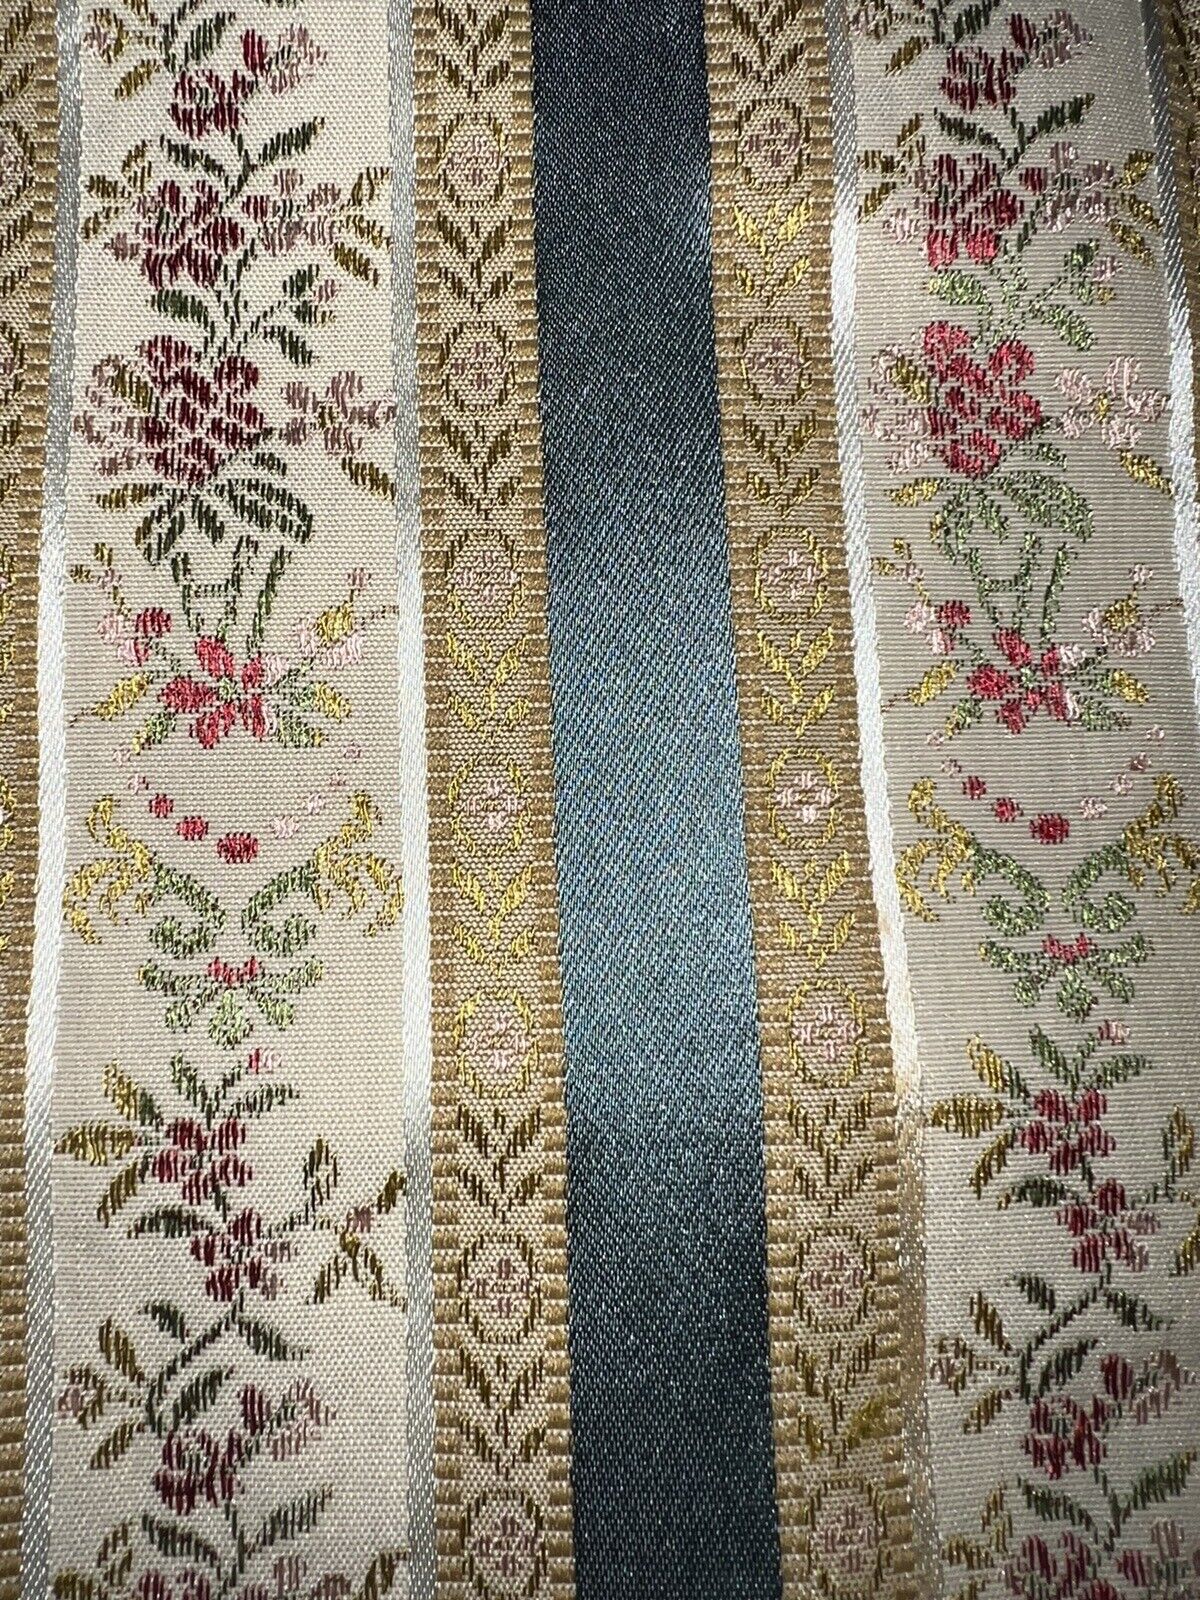 FABULOUS FRENCH BROCADE FABRIC~ TEAL & FLORAL STRIPE~SILK BLEND~MUST SEE